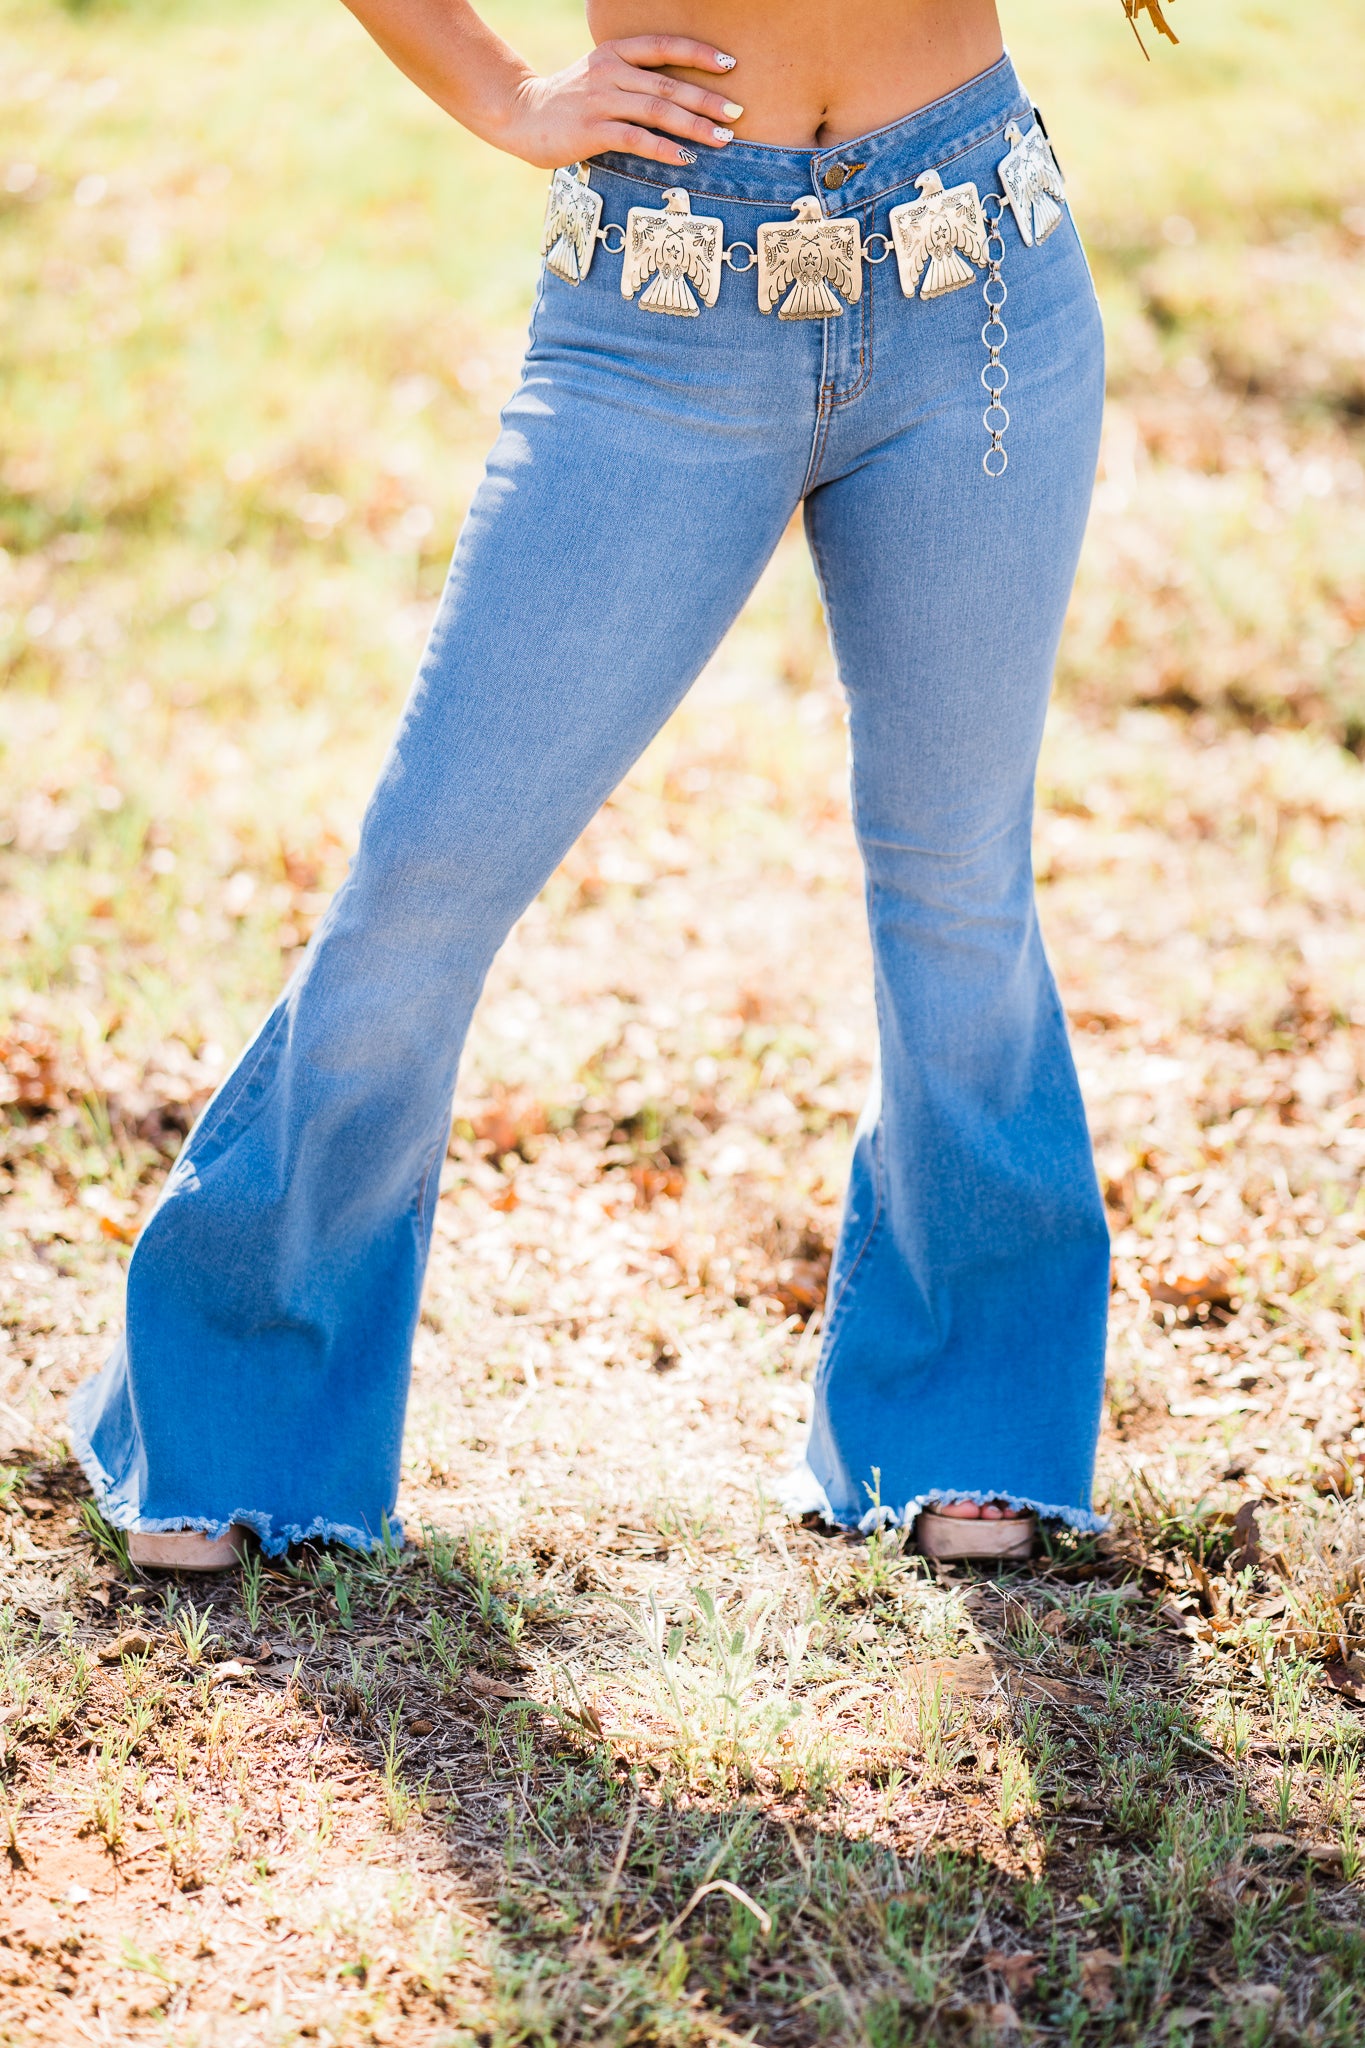 The Maybelle Bell Bottoms – Southern Girl Addiction, 40% OFF